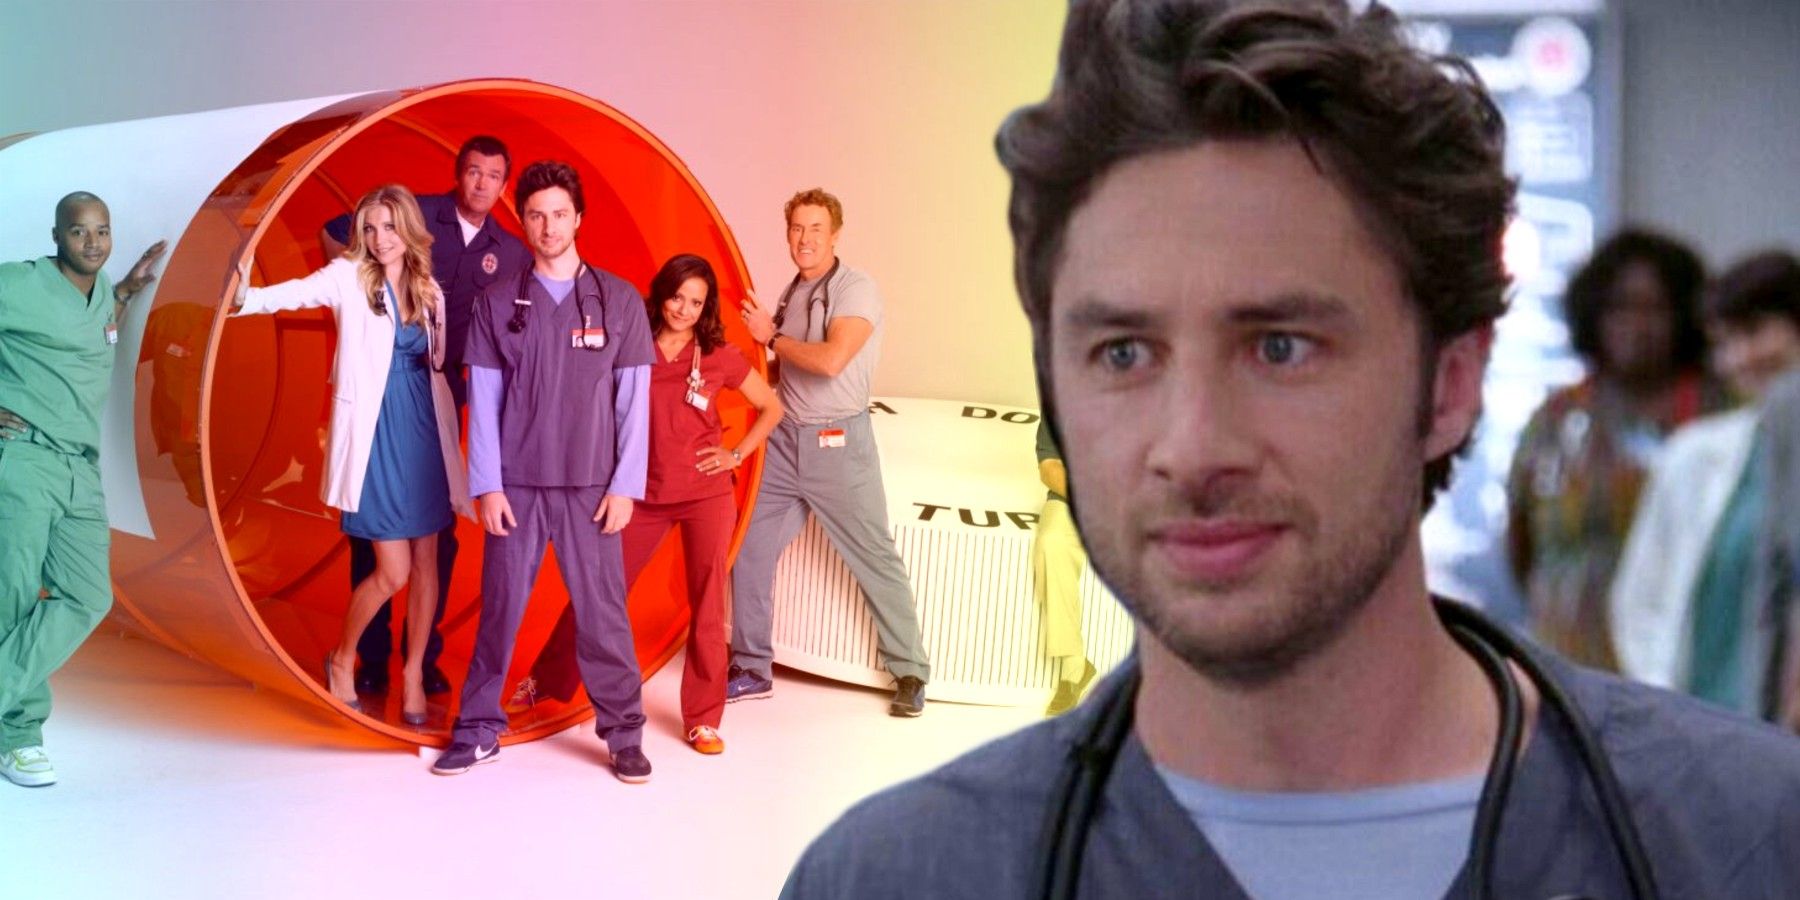 Been scrubbed. The Scrubs Cast 20 years later.